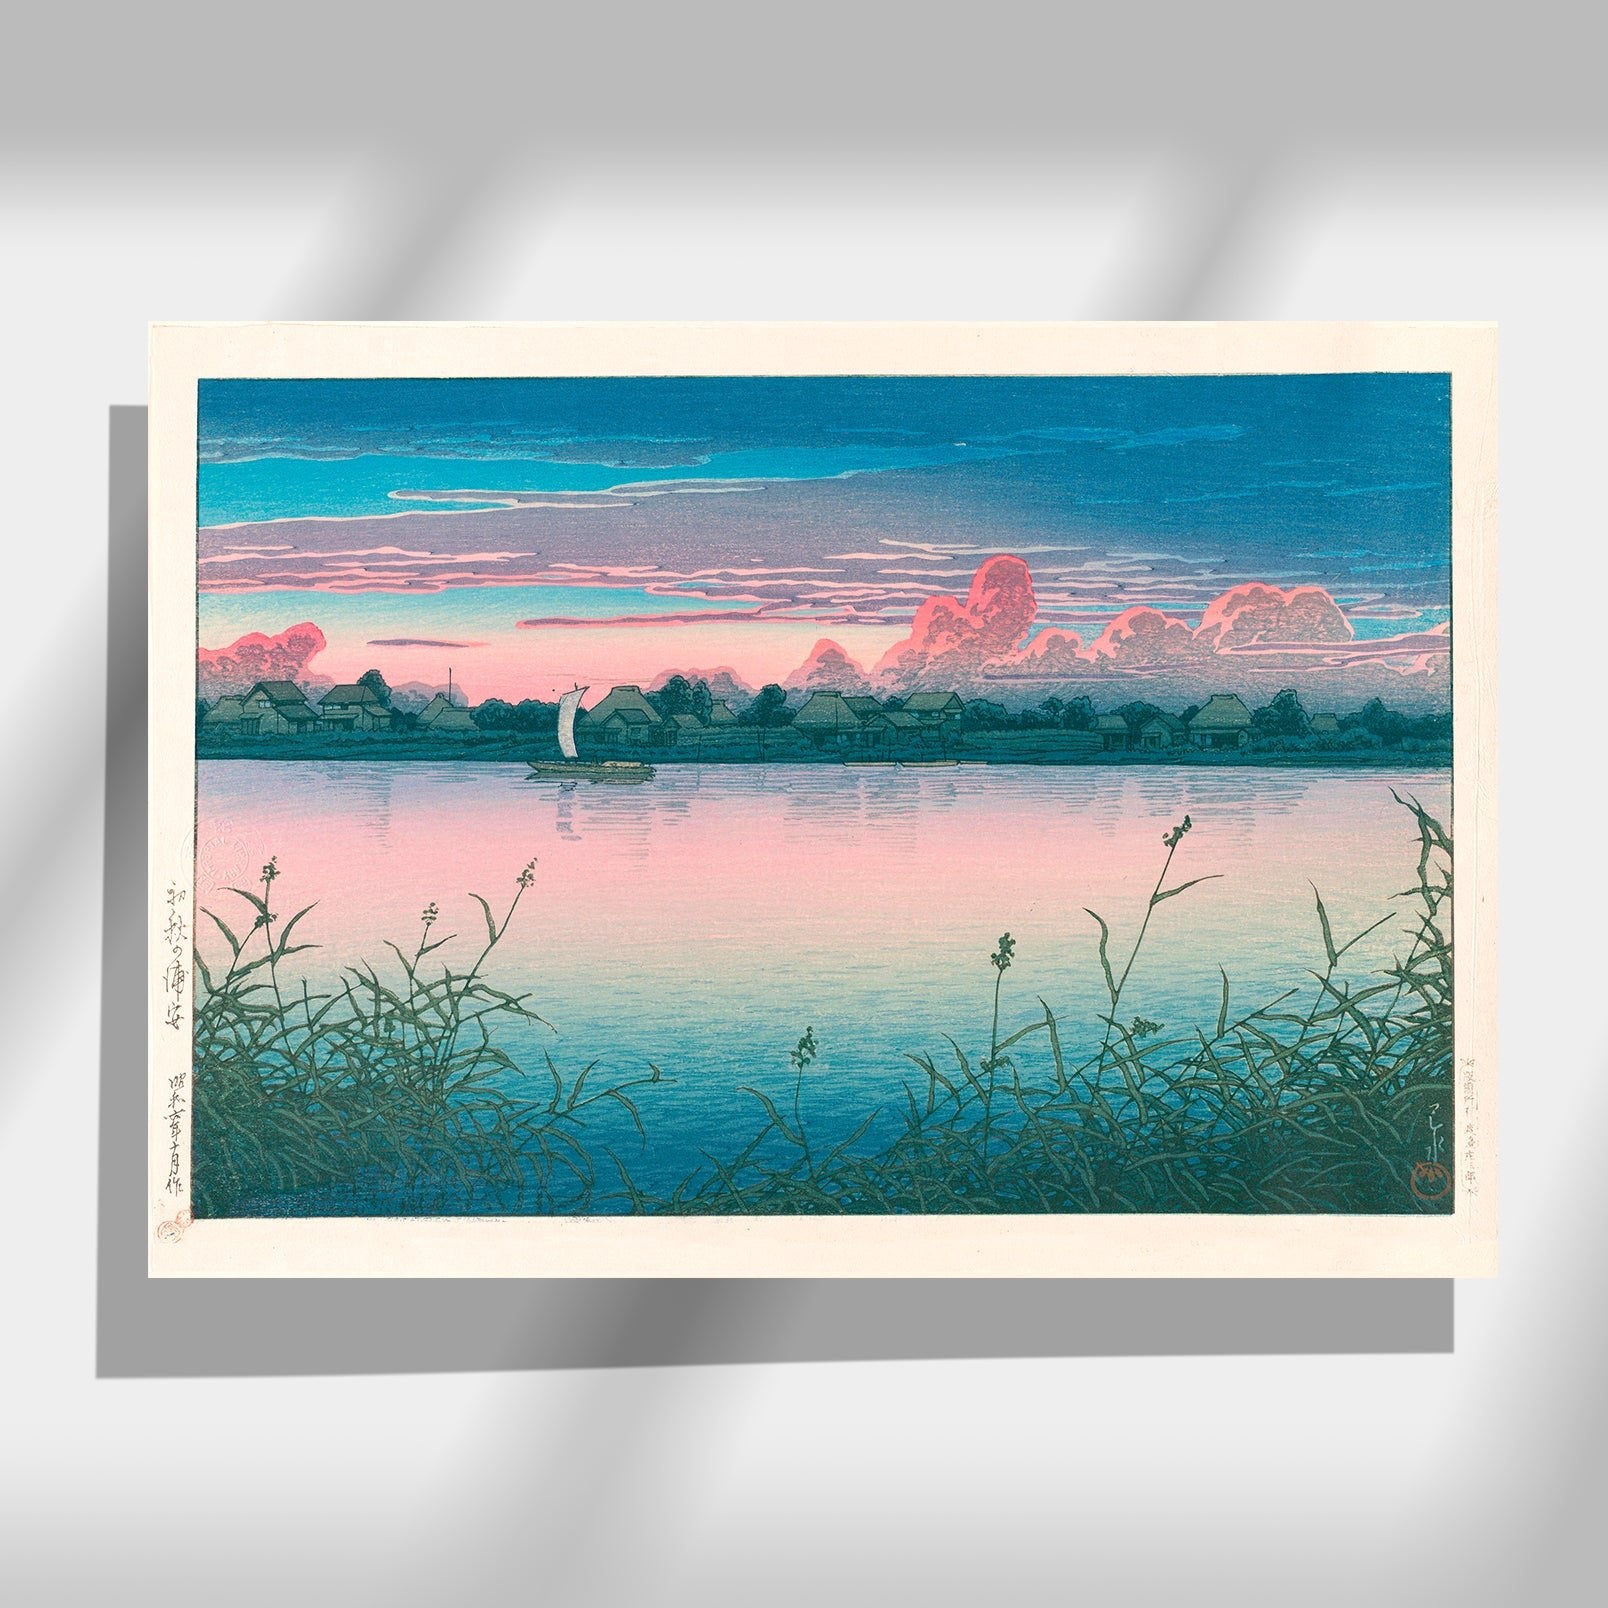 Kawase Hasui's Japanese Art Poster: A breathtaking sunset painting reflecting on the tranquil water